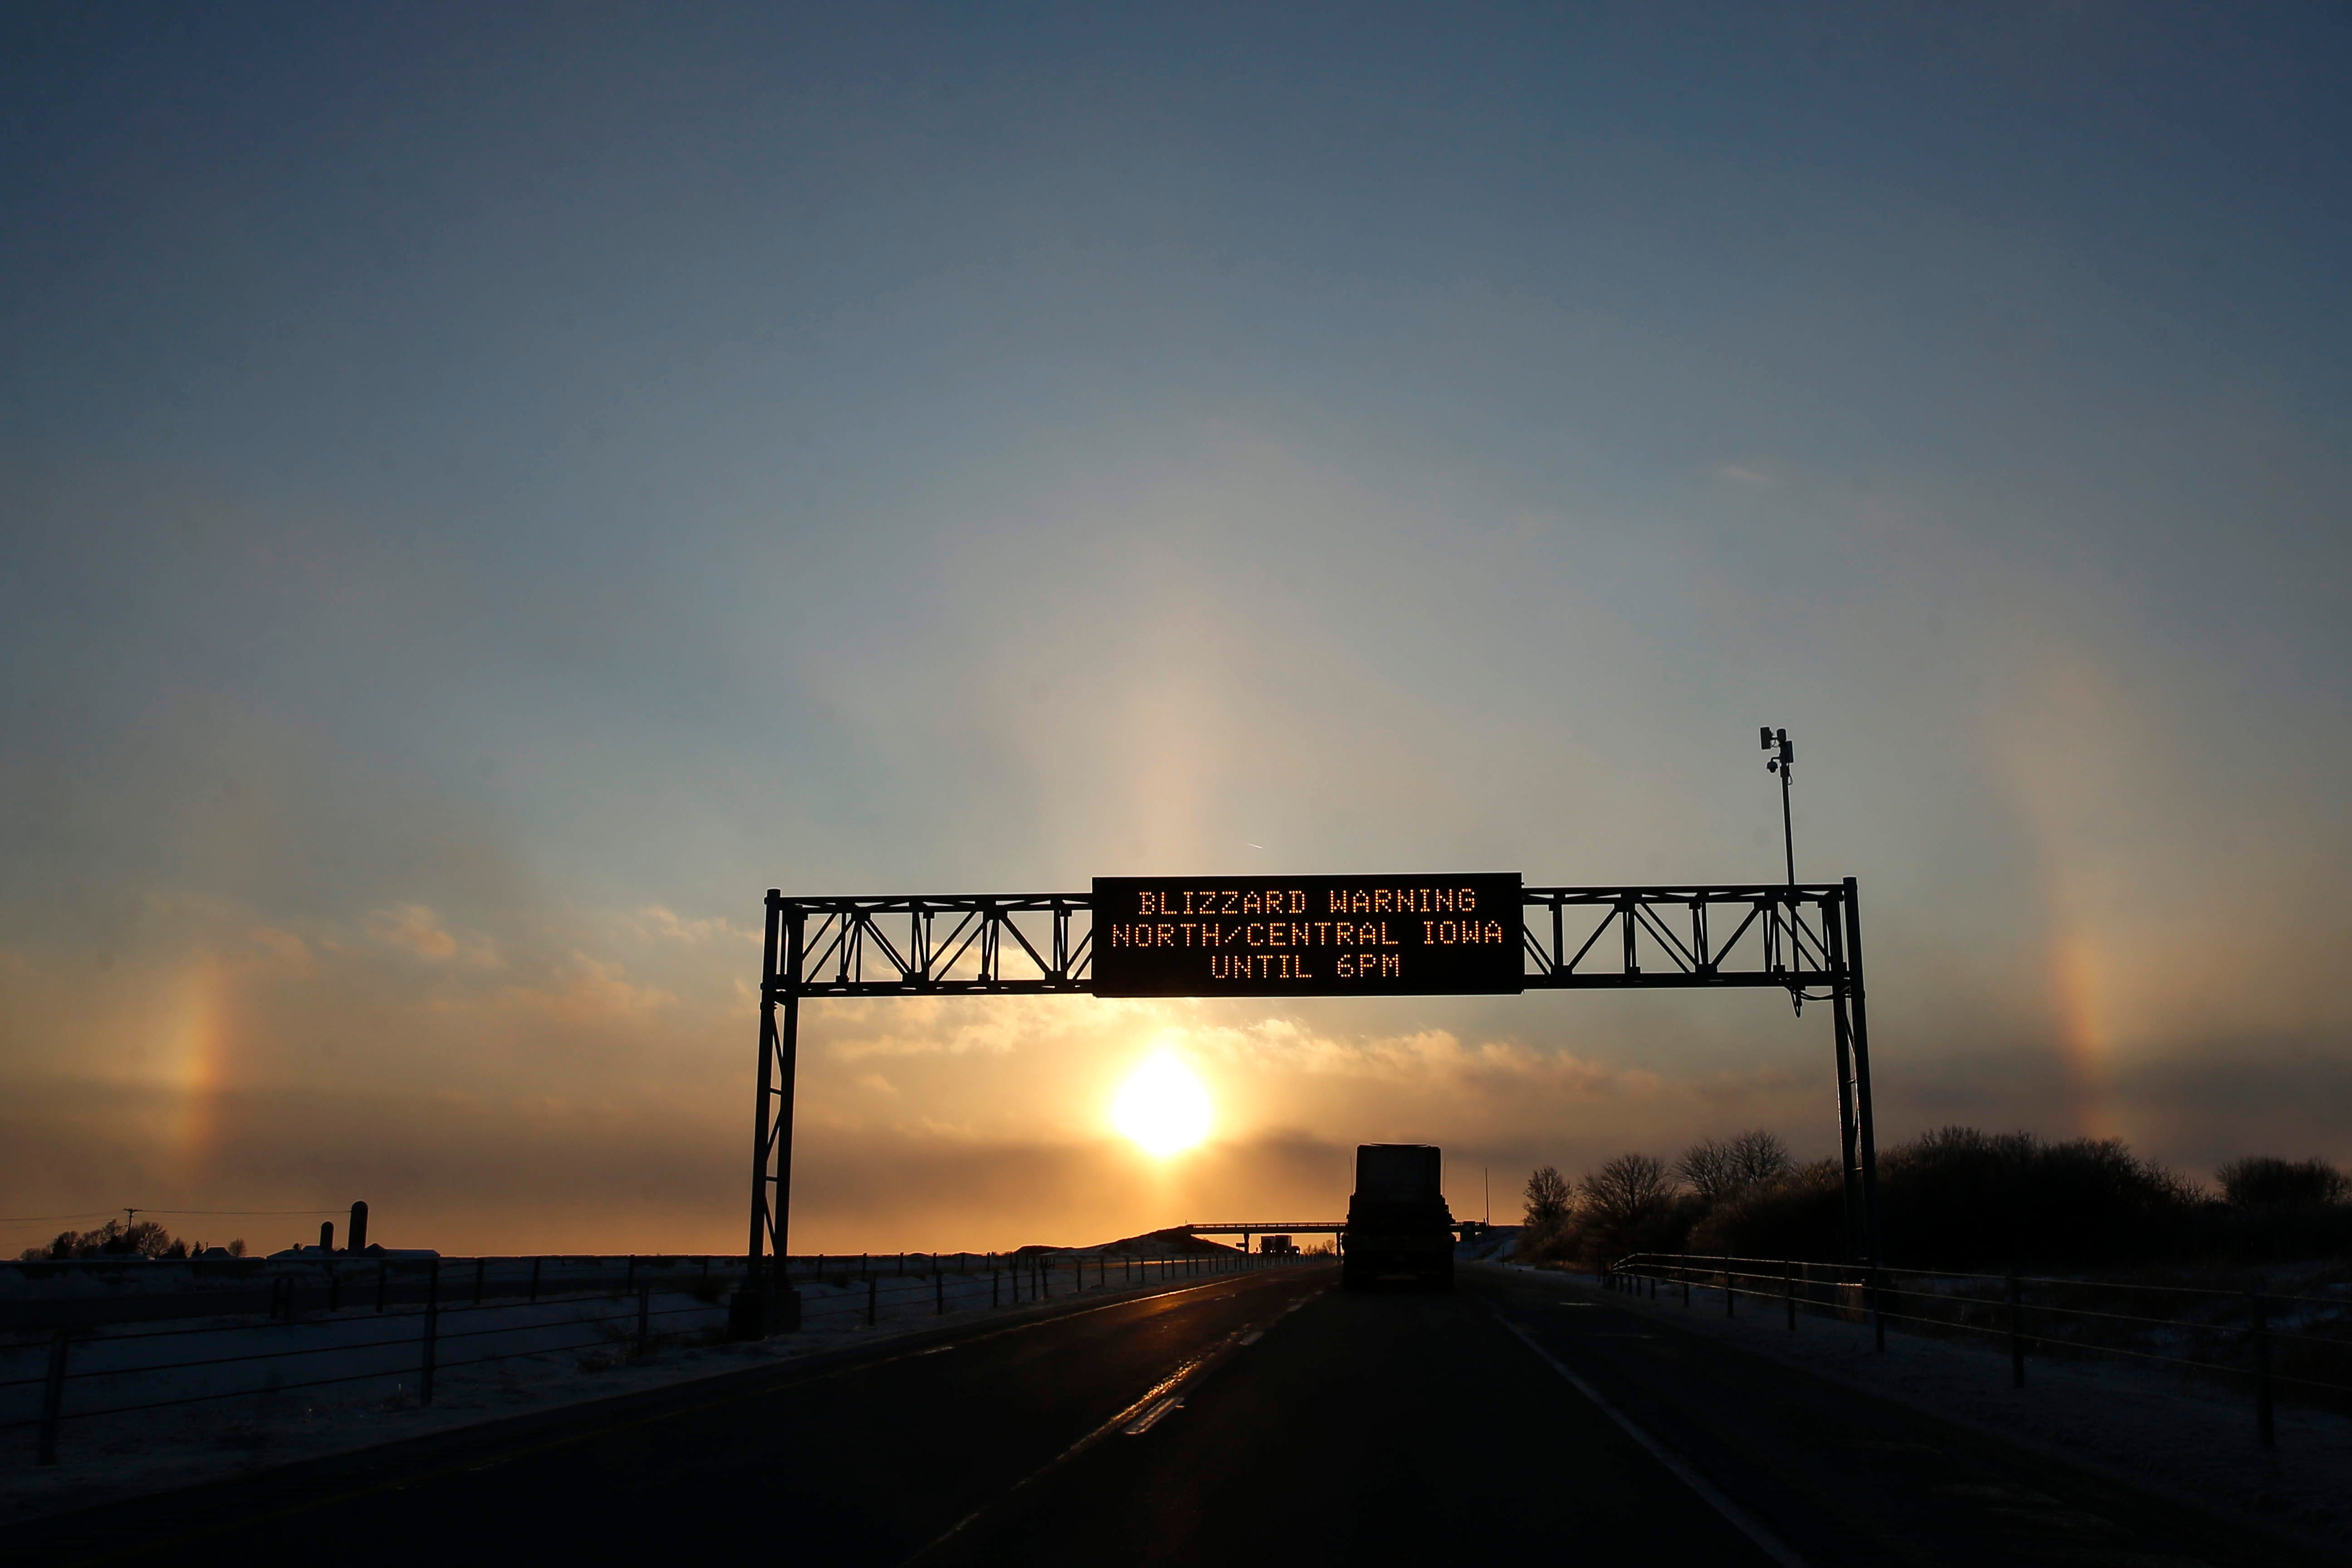 4:44 p.m., Newton — A large sundog arches over an Iowa Department of Transportation sign cautioning motorists about a blizzard warning in much of central and northern Iowa. Sundogs occur when there are ice crystals in the atmosphere, creating orbs on both sides of the sun.